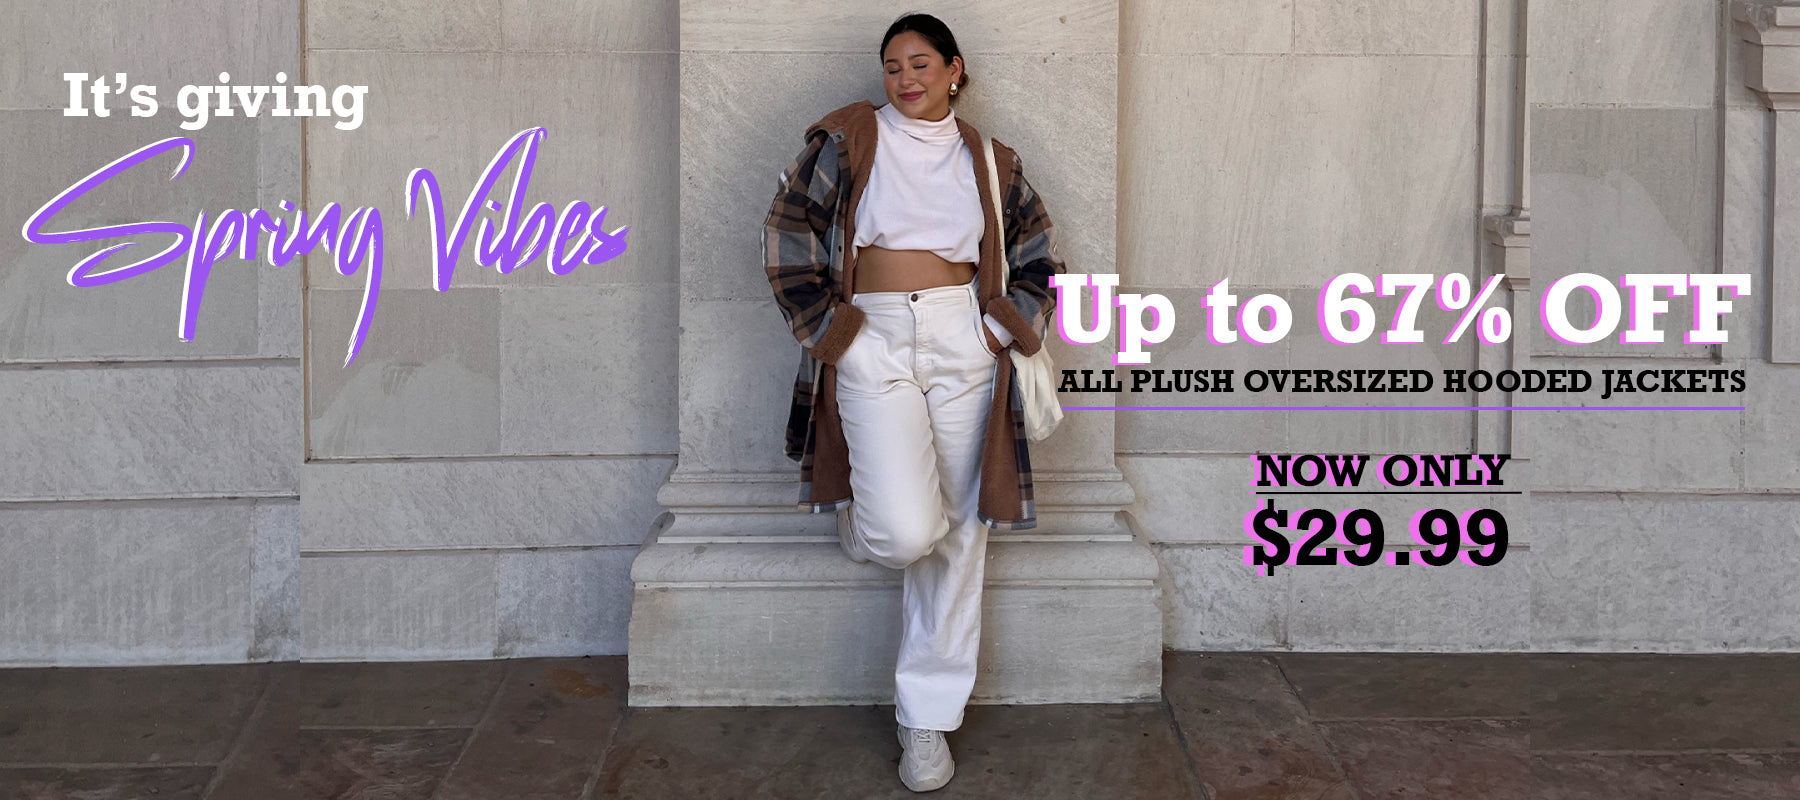 All oversized long plush jackets are now on sale at  $29.99.